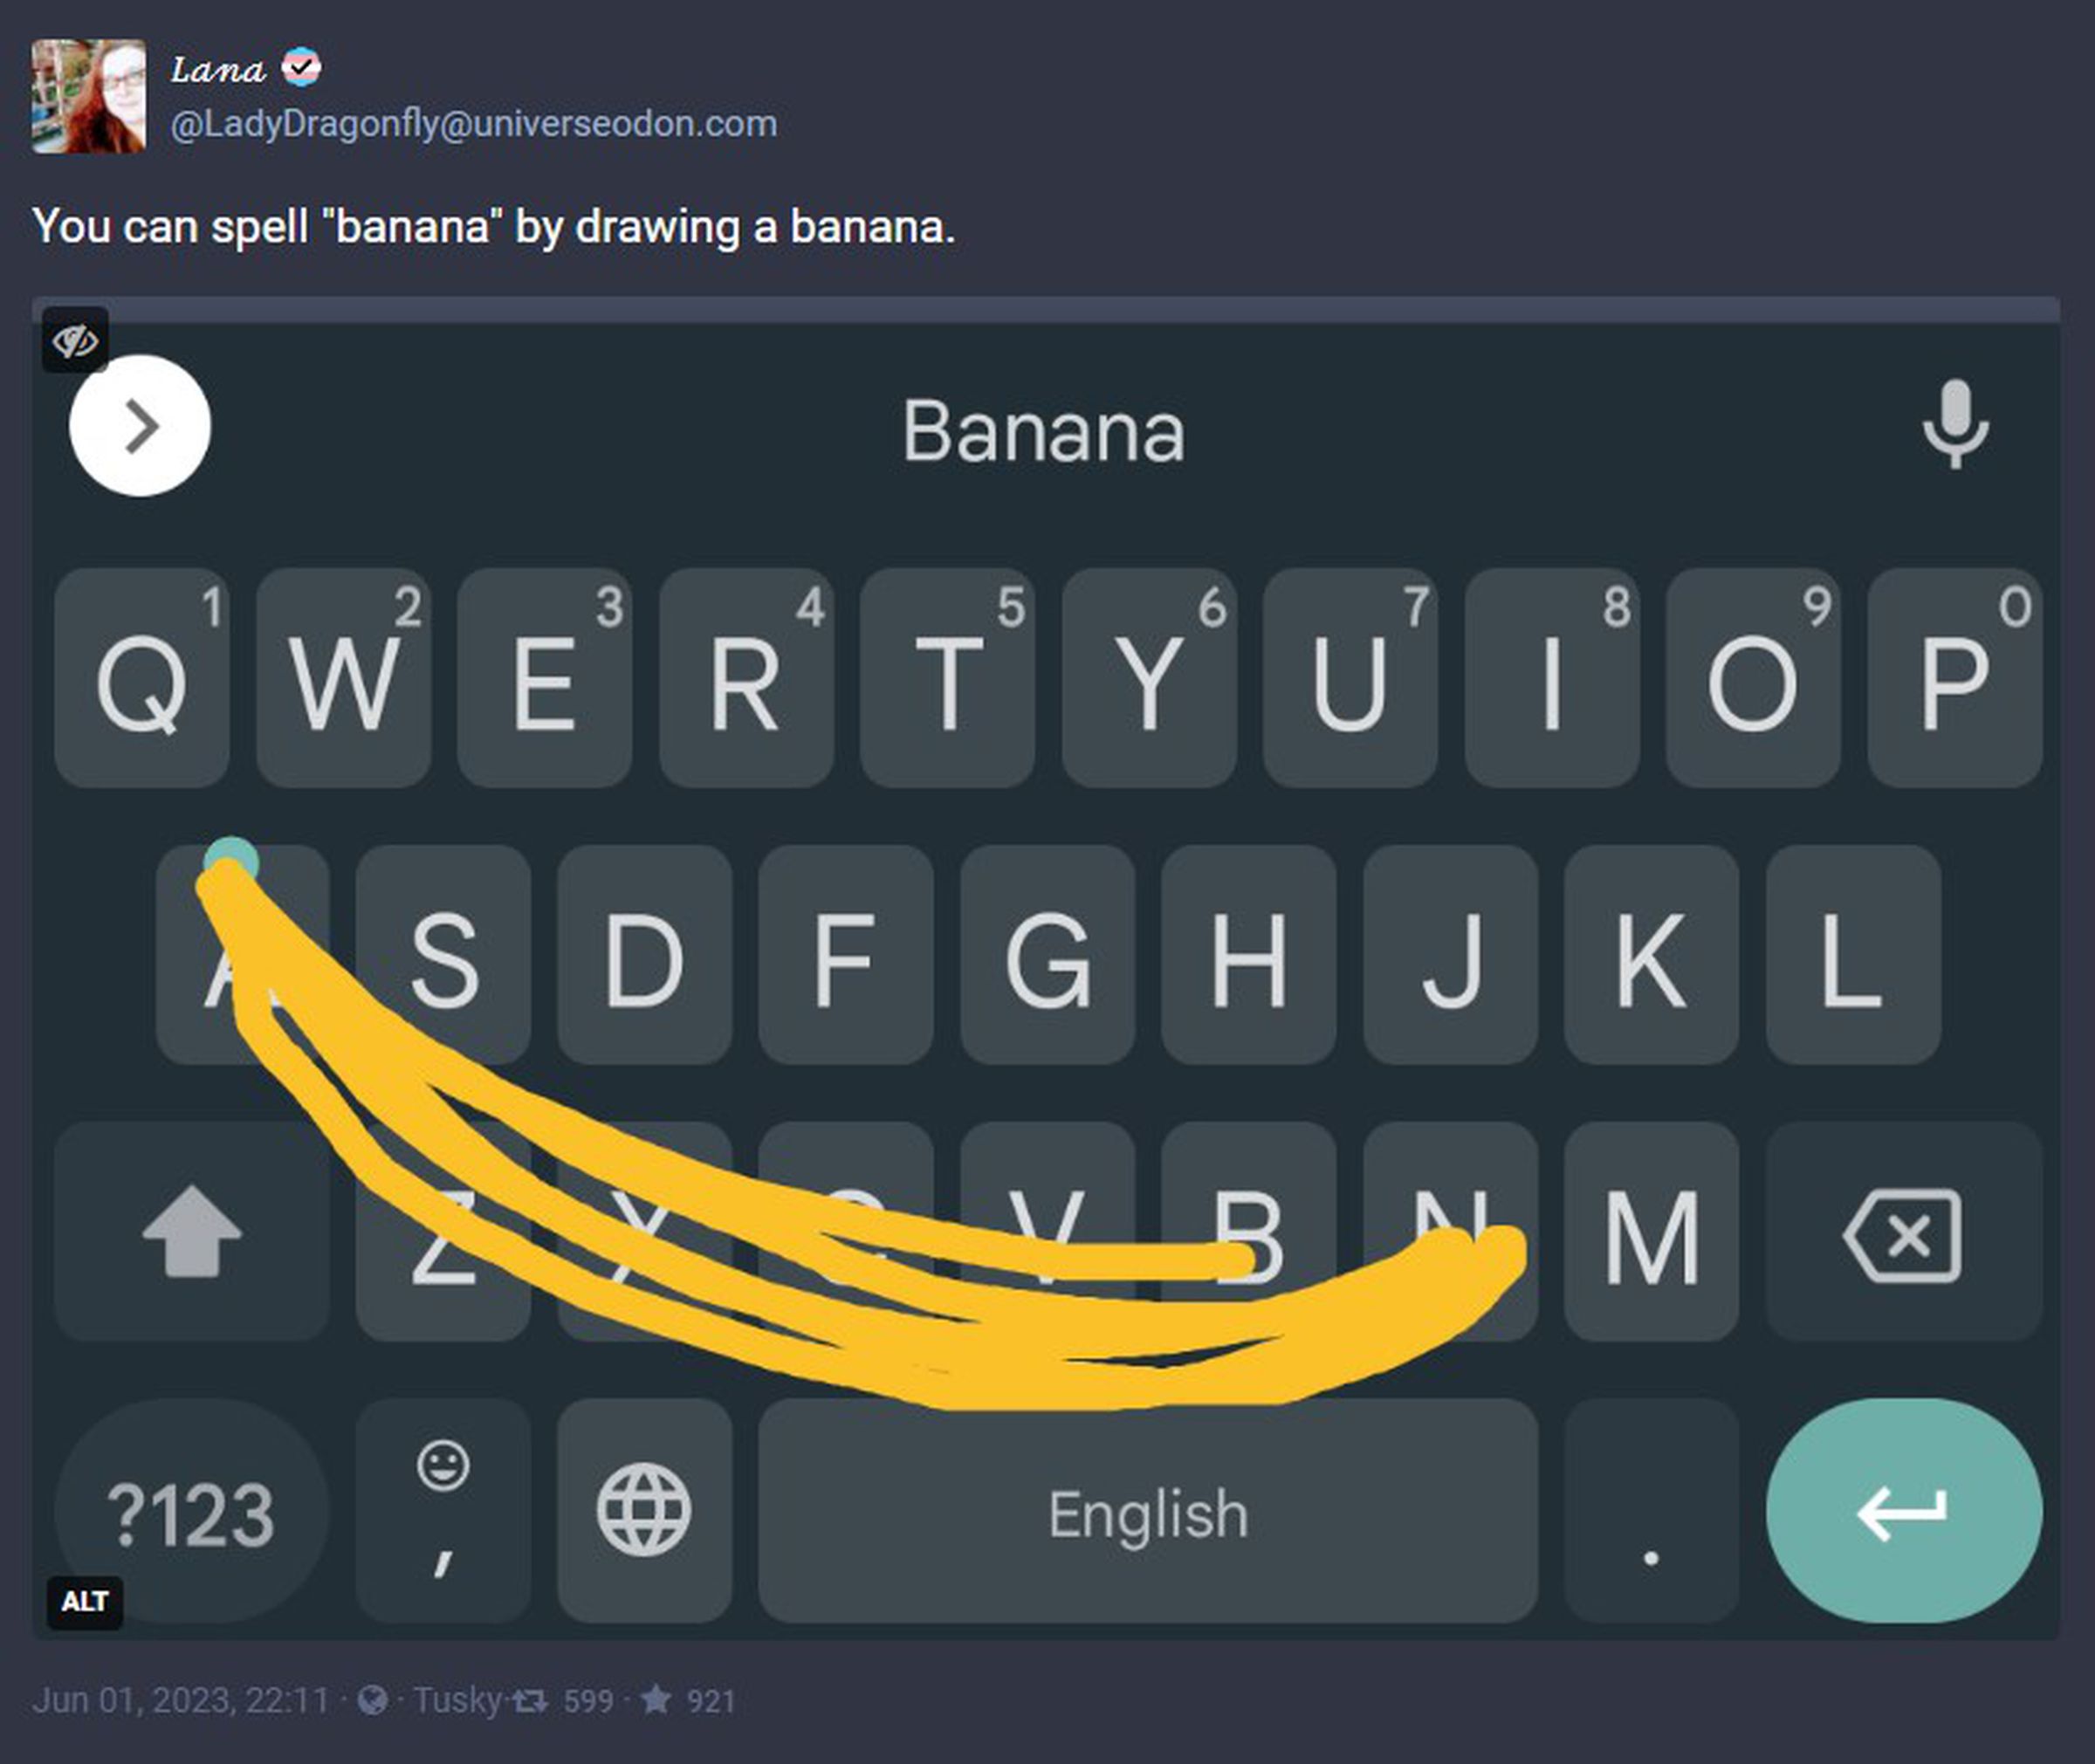 Swiping across one’s keyboard to spell banana also winds up drawing a picture of a banana as you do so, the image shows, assuming you curve your finger instead of making straight lines from letter to letter.